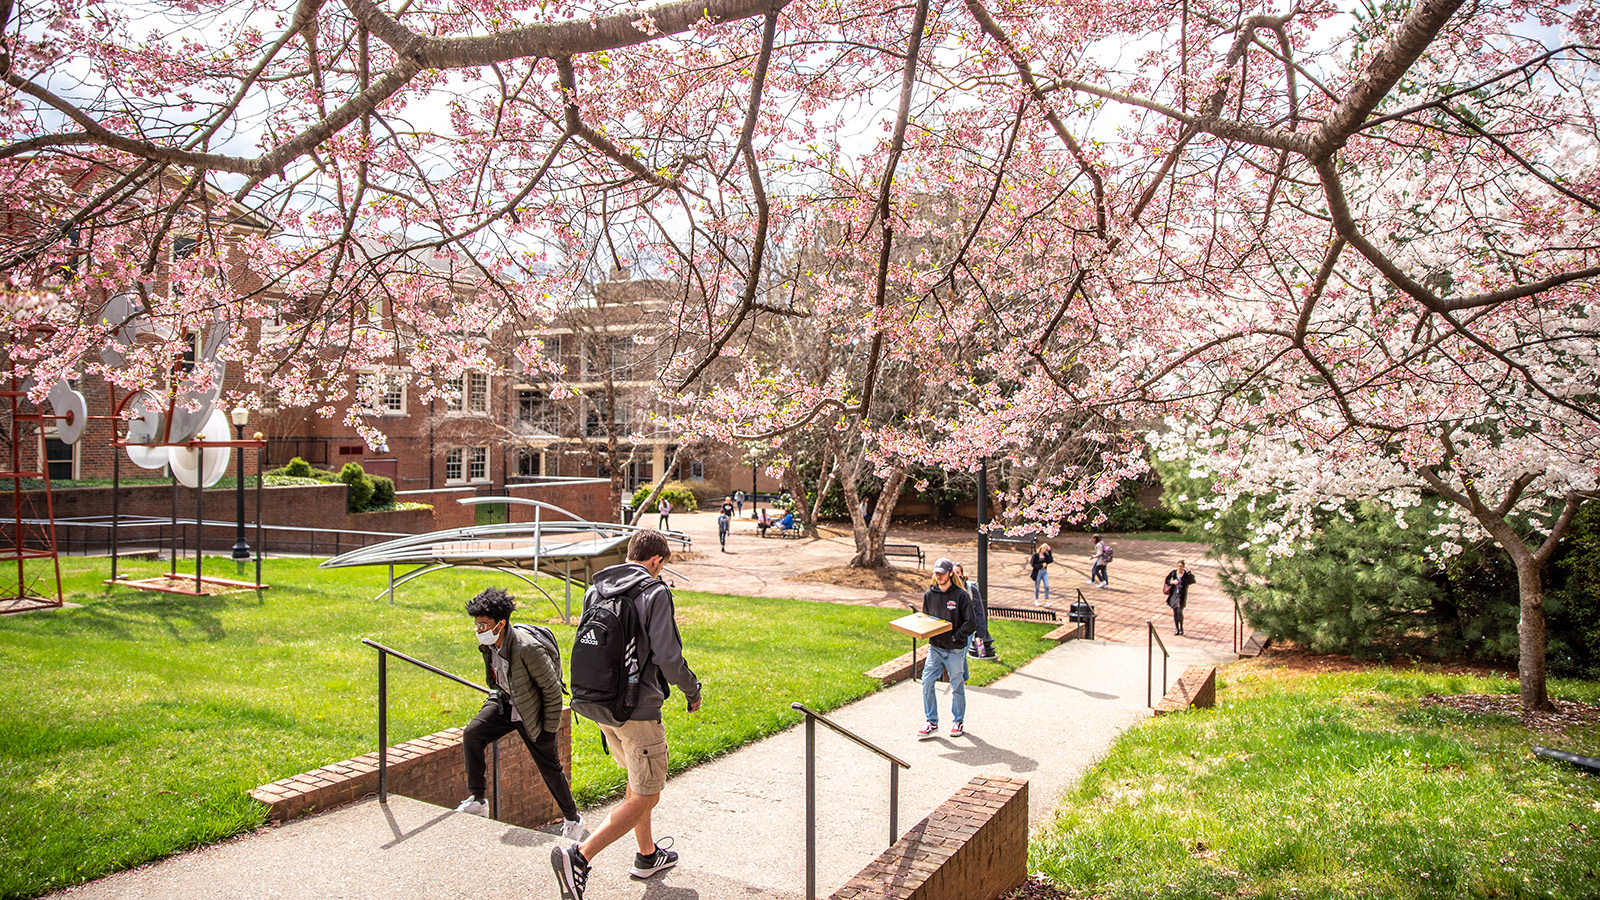 Cherry trees bloom pink on campus.